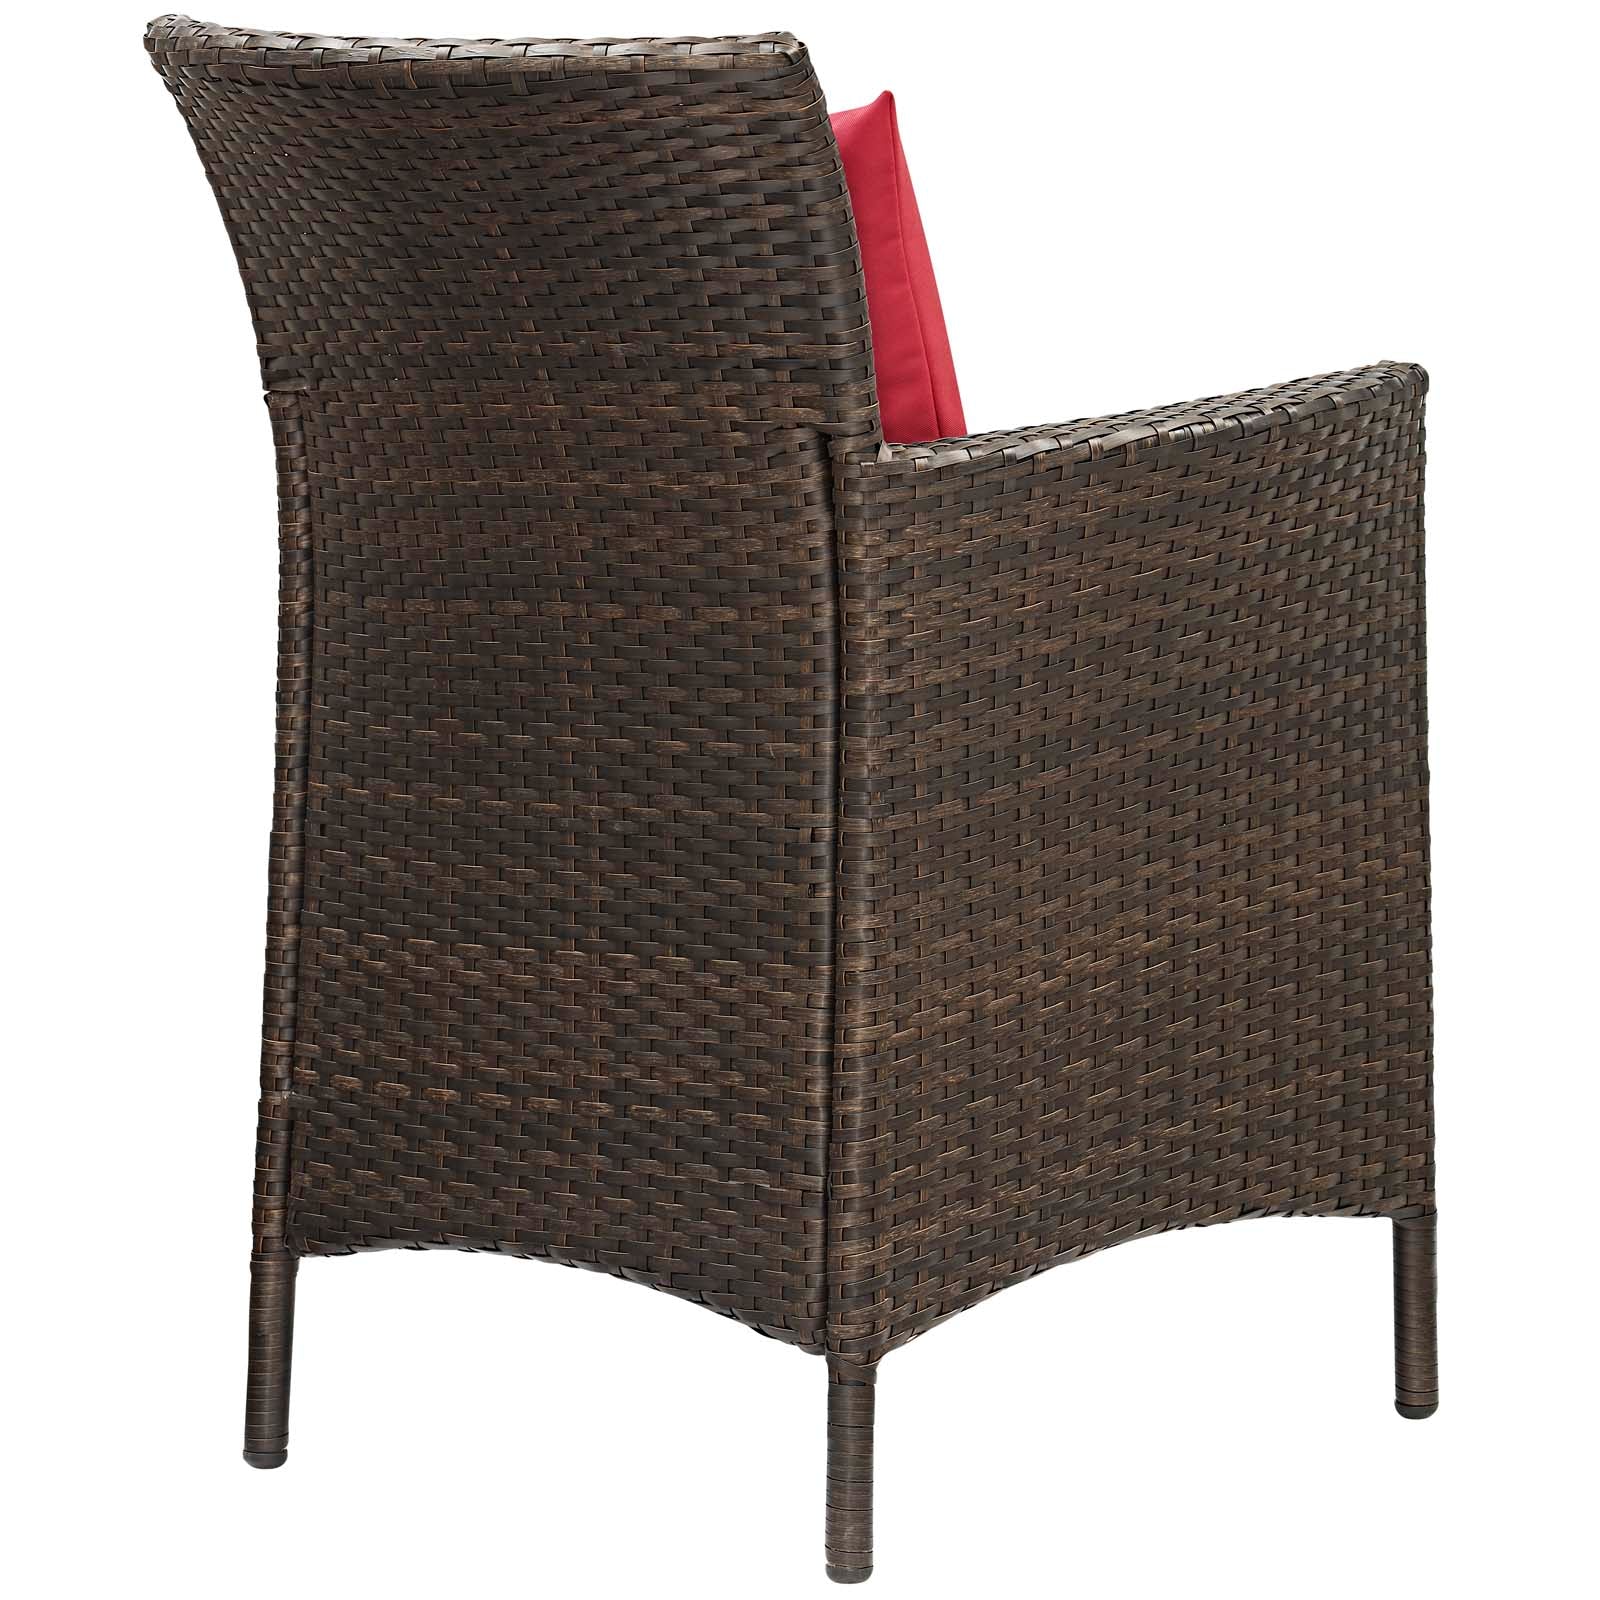 Modway Outdoor Dining Chairs - Conduit Outdoor Patio Wicker Rattan Dining Armchair Brown Red